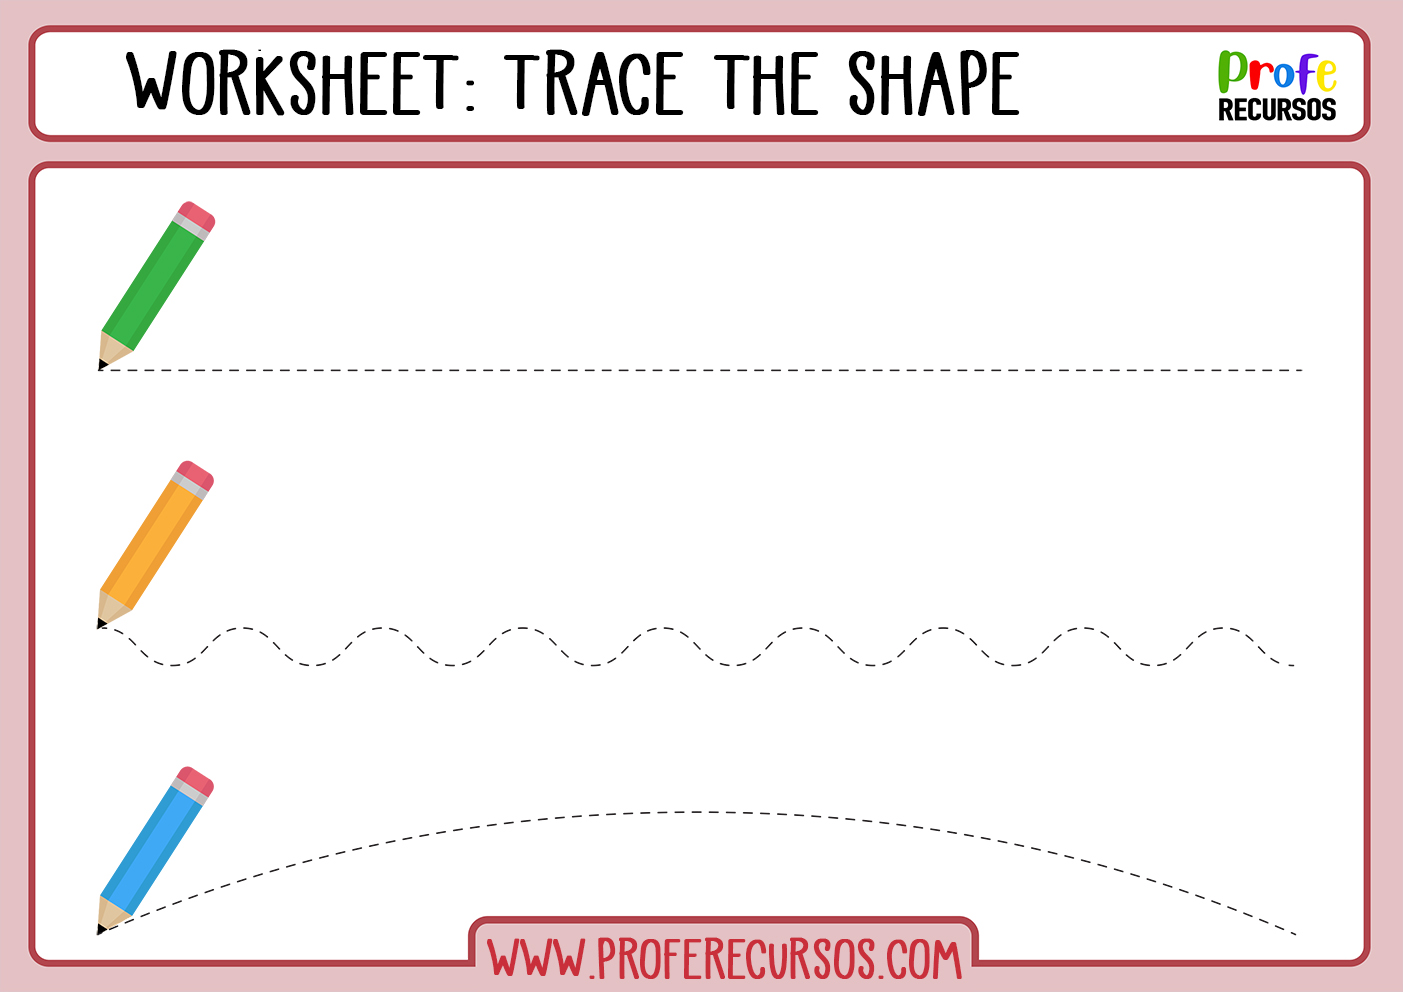 Trace the shapes worksheet